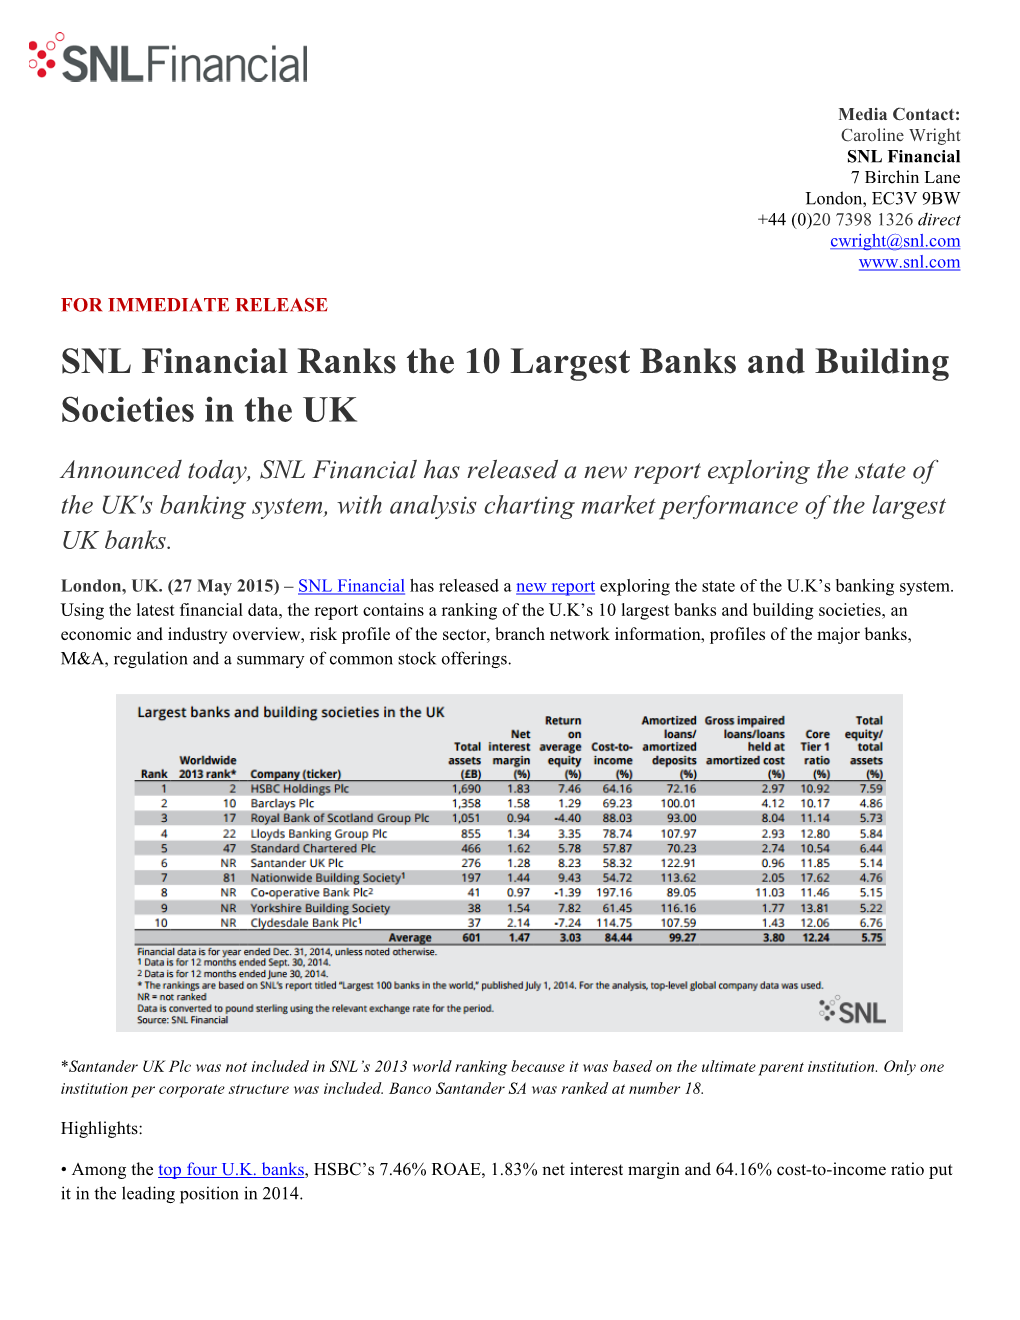 SNL Financial Ranks the 10 Largest Banks and Building Societies in the UK